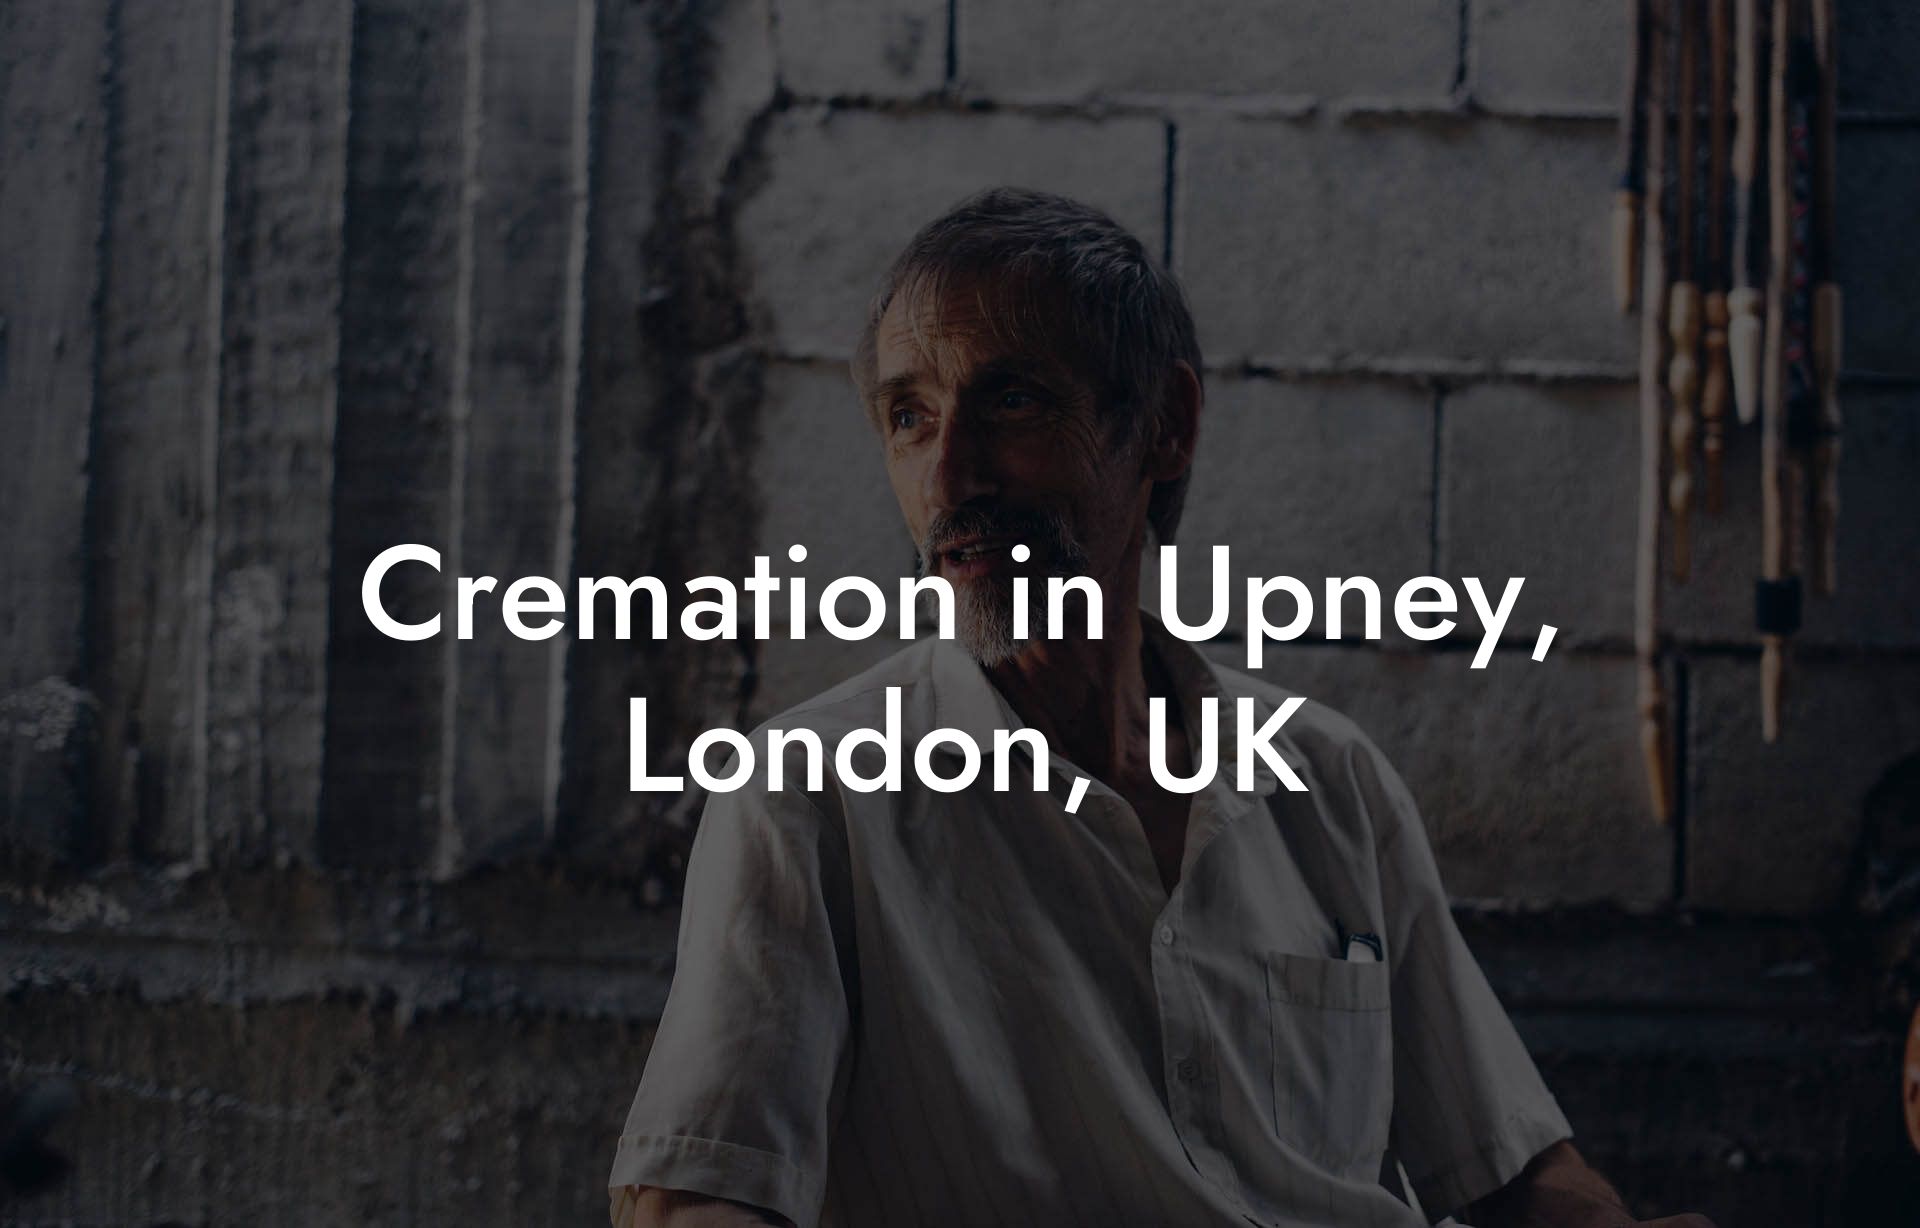 Cremation in Upney, London, UK